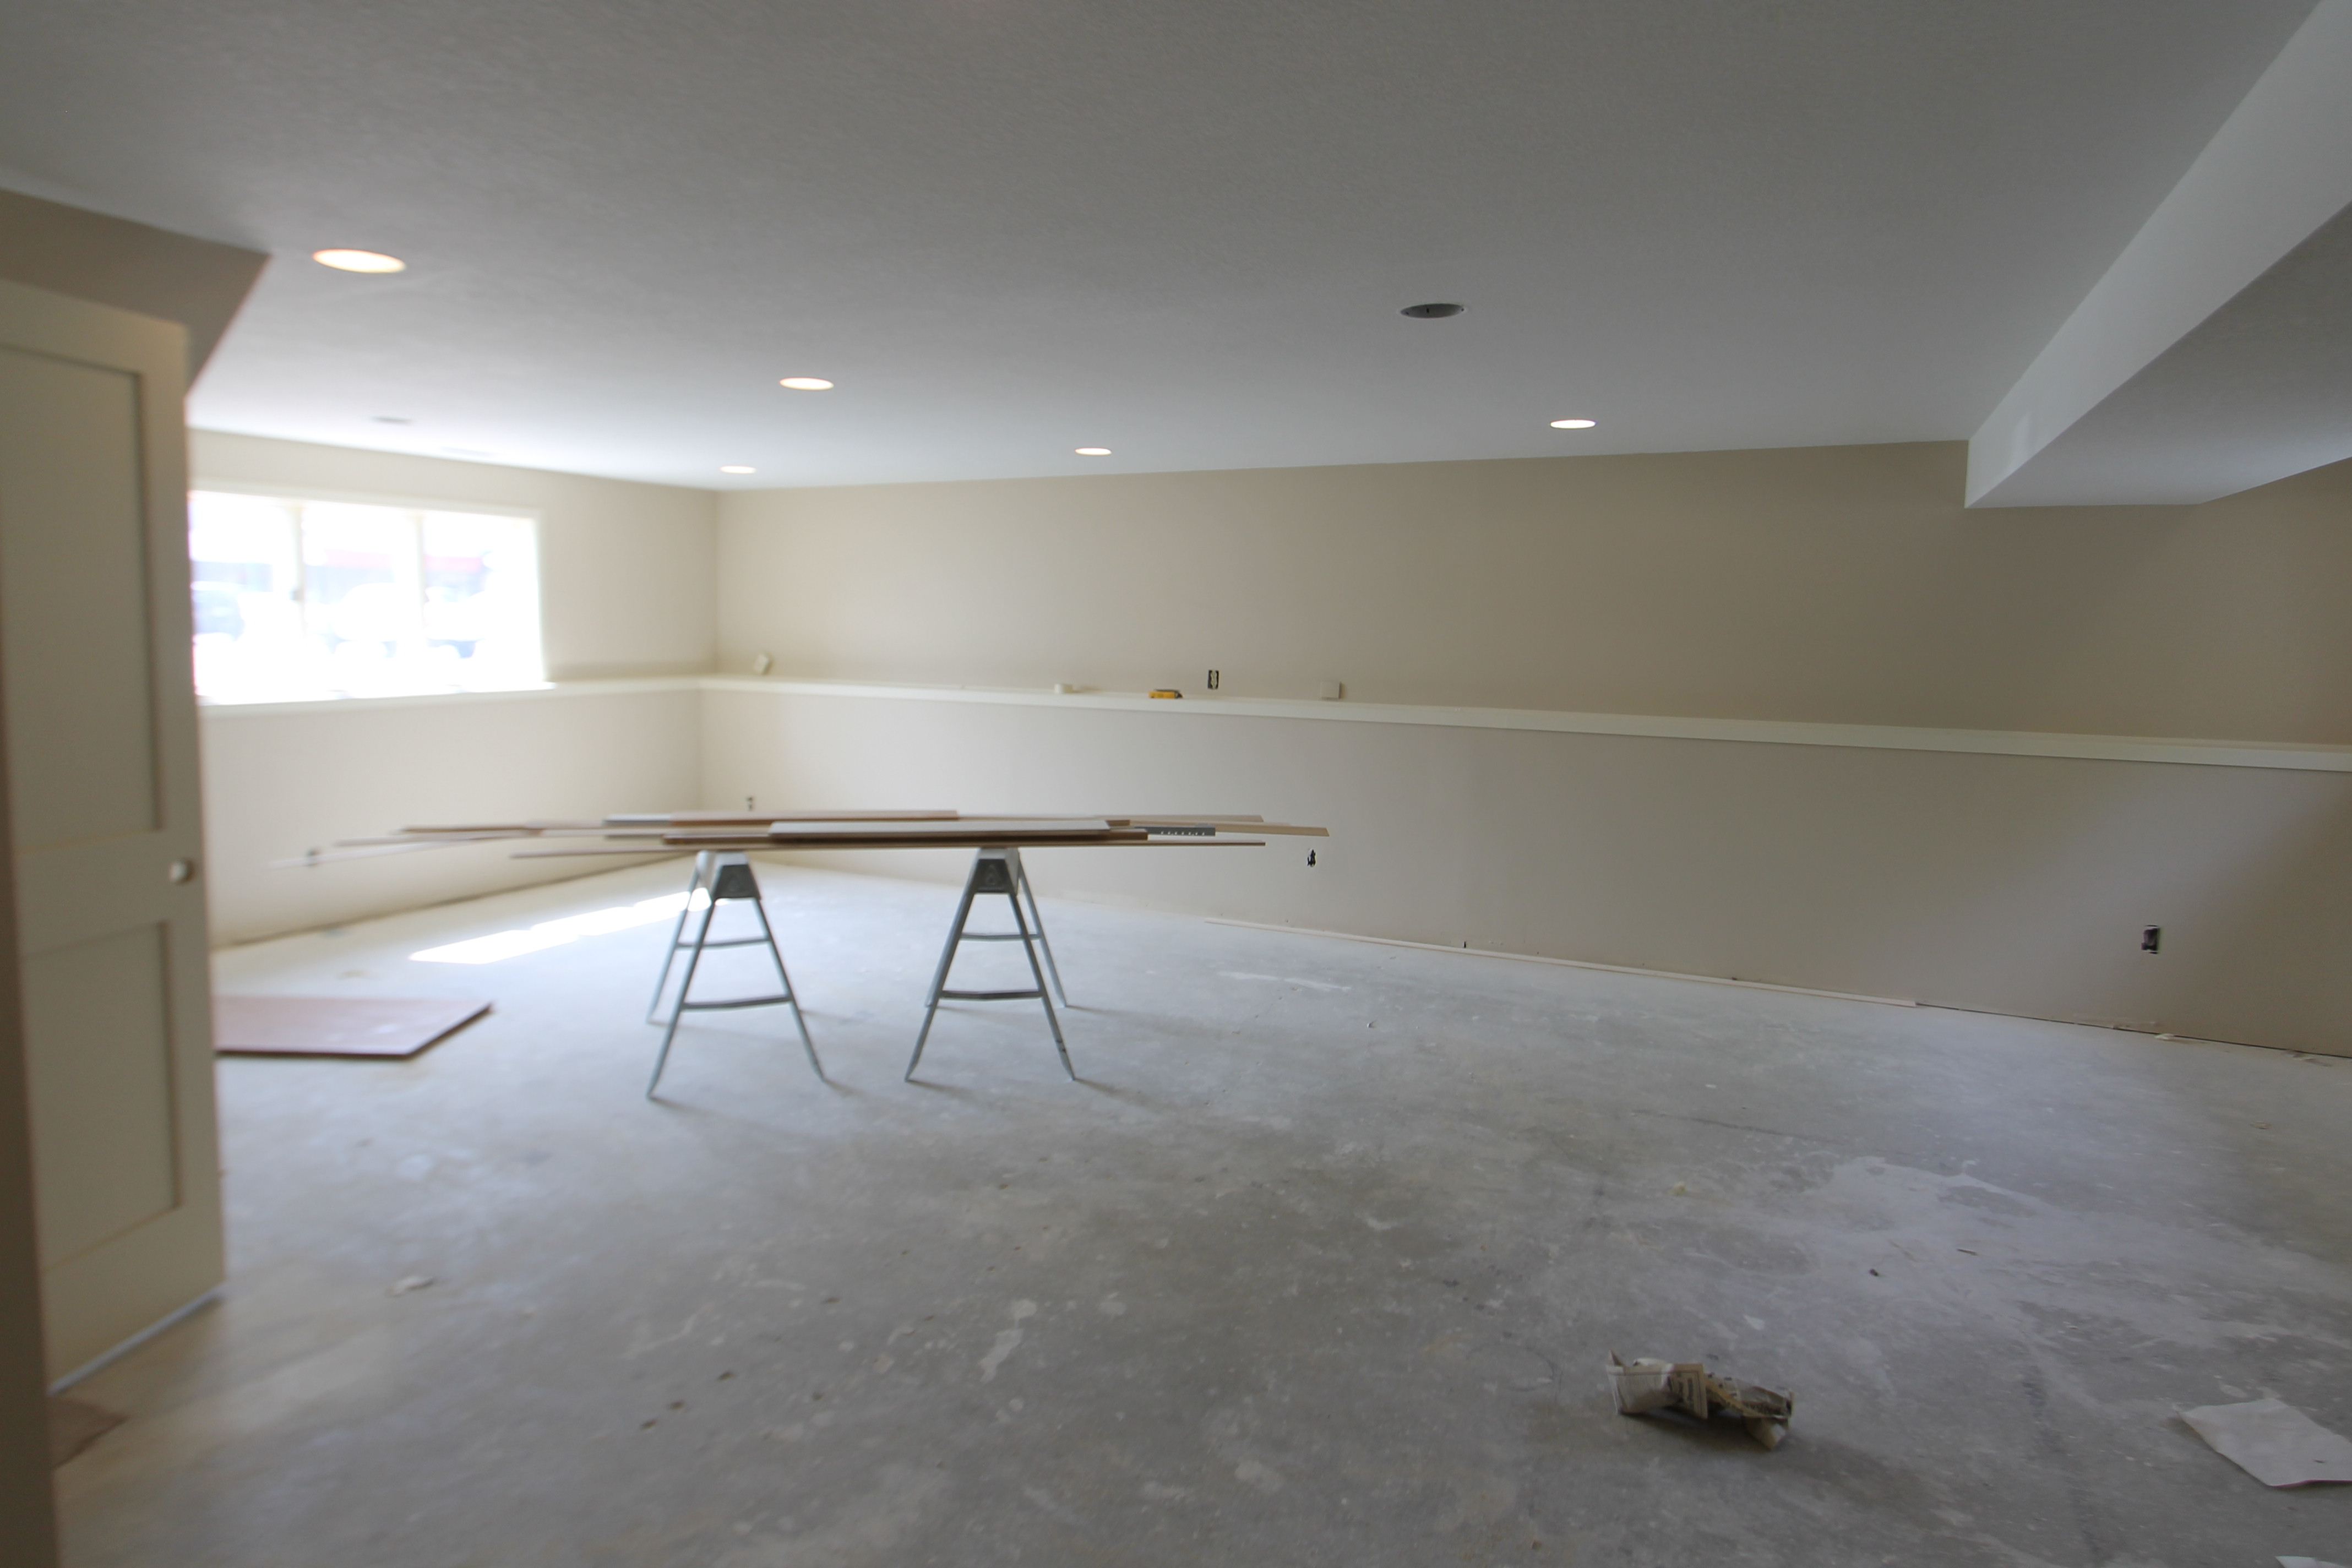 Commercial Remodel & Addition to Office Space Underway in Downtown 